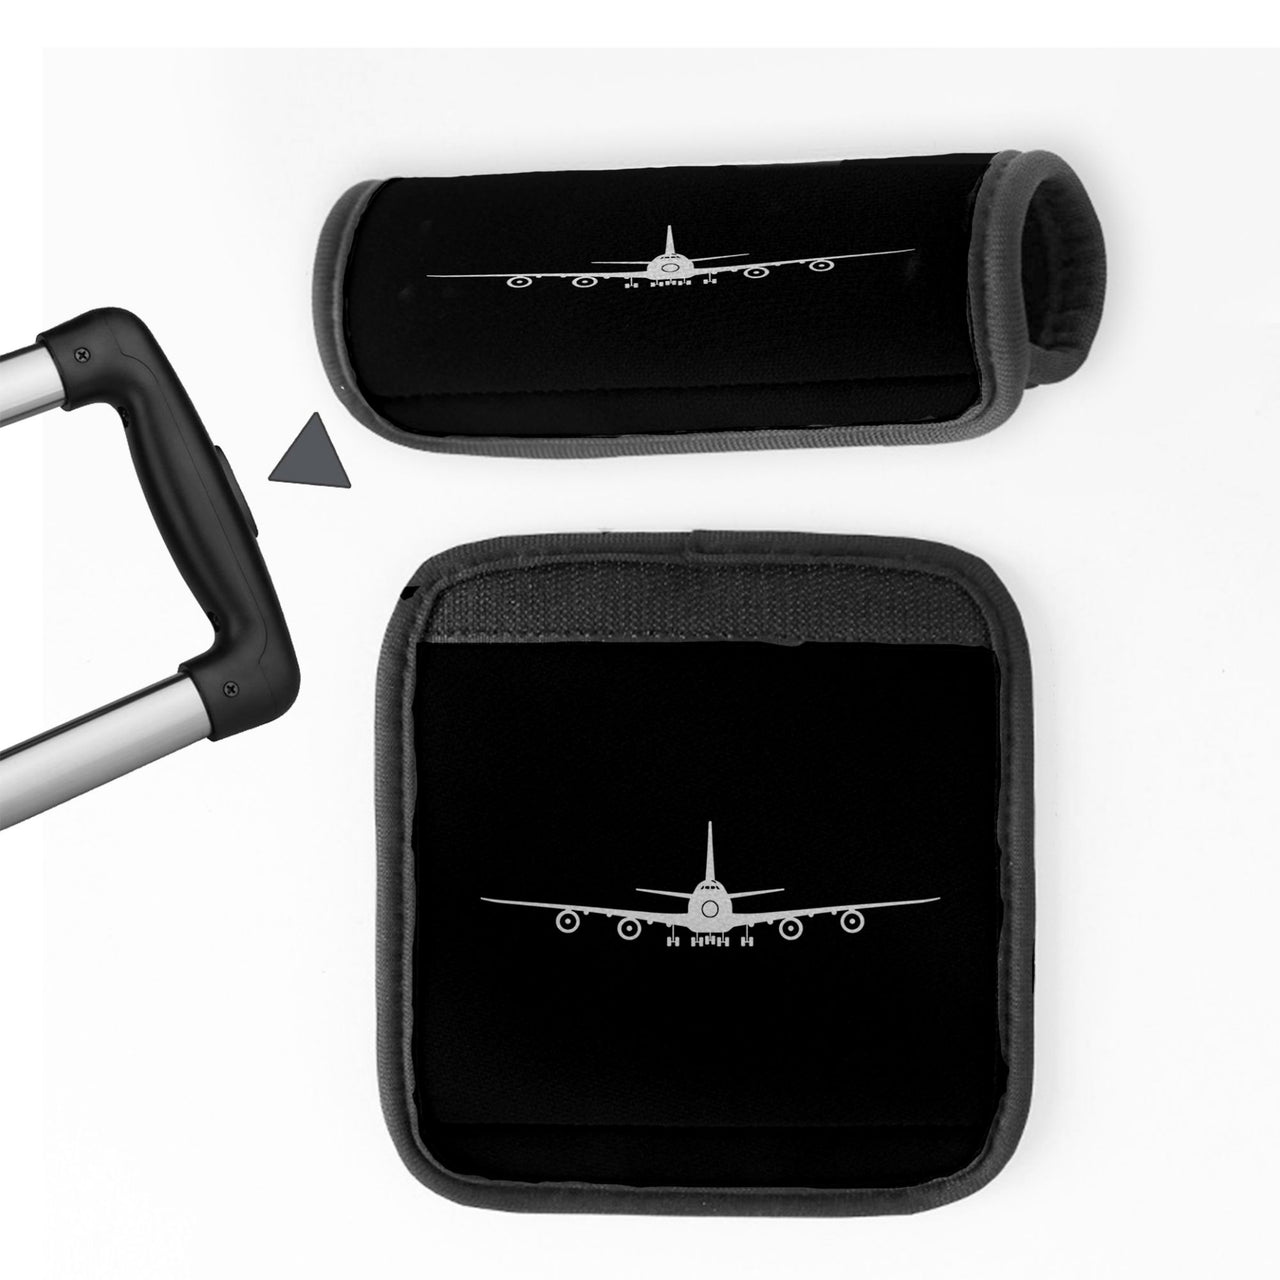 Boeing 747 Silhouette Designed Neoprene Luggage Handle Covers